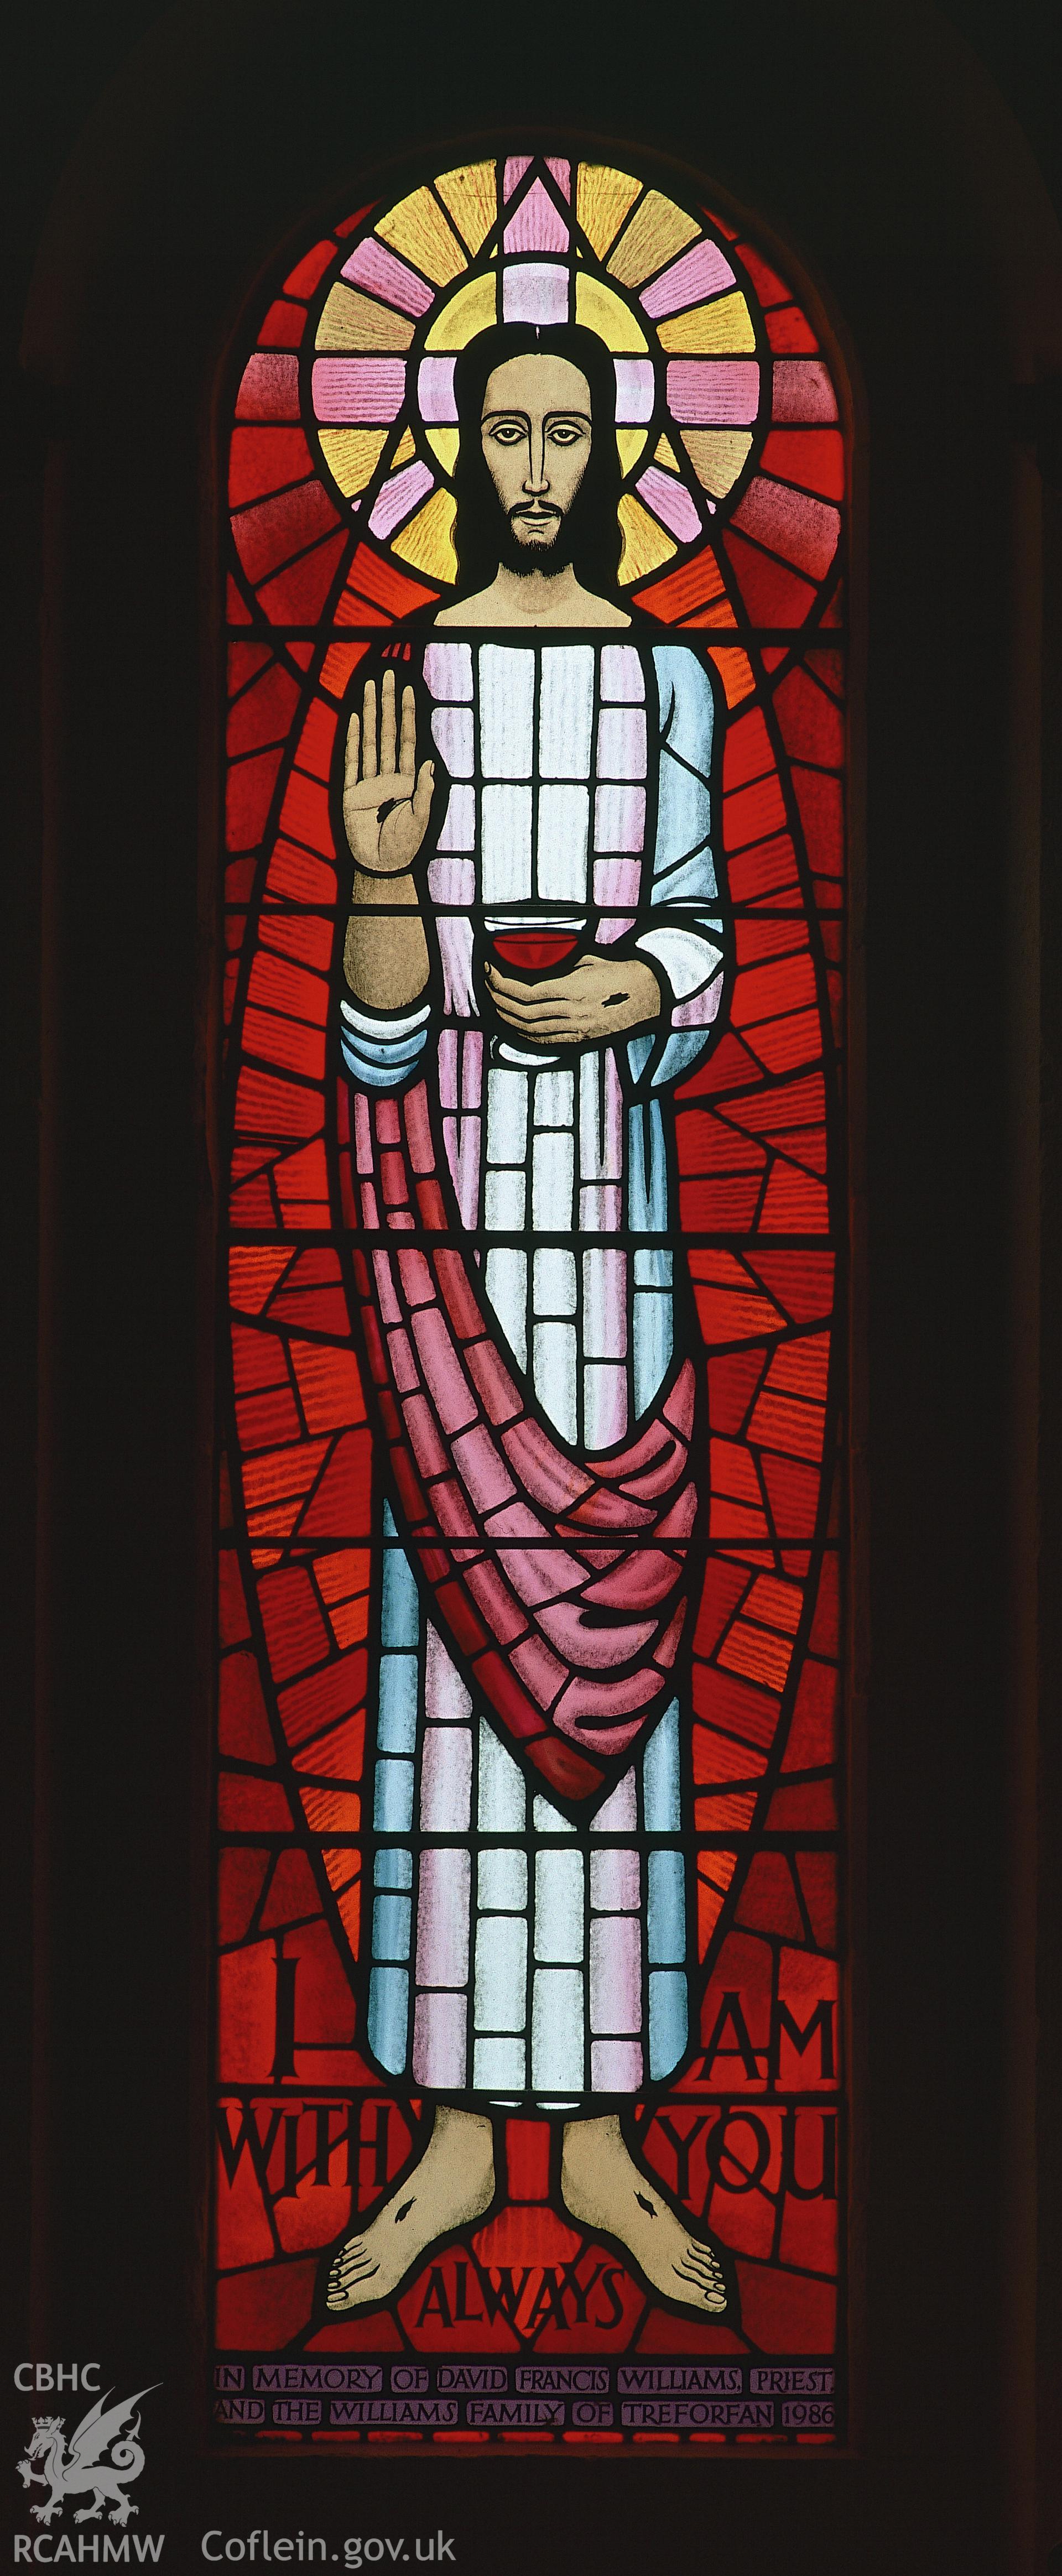 RCAHMW colour transparency showing view of the stained glass window by John Petts, at St Mary's Church, Fishguard.